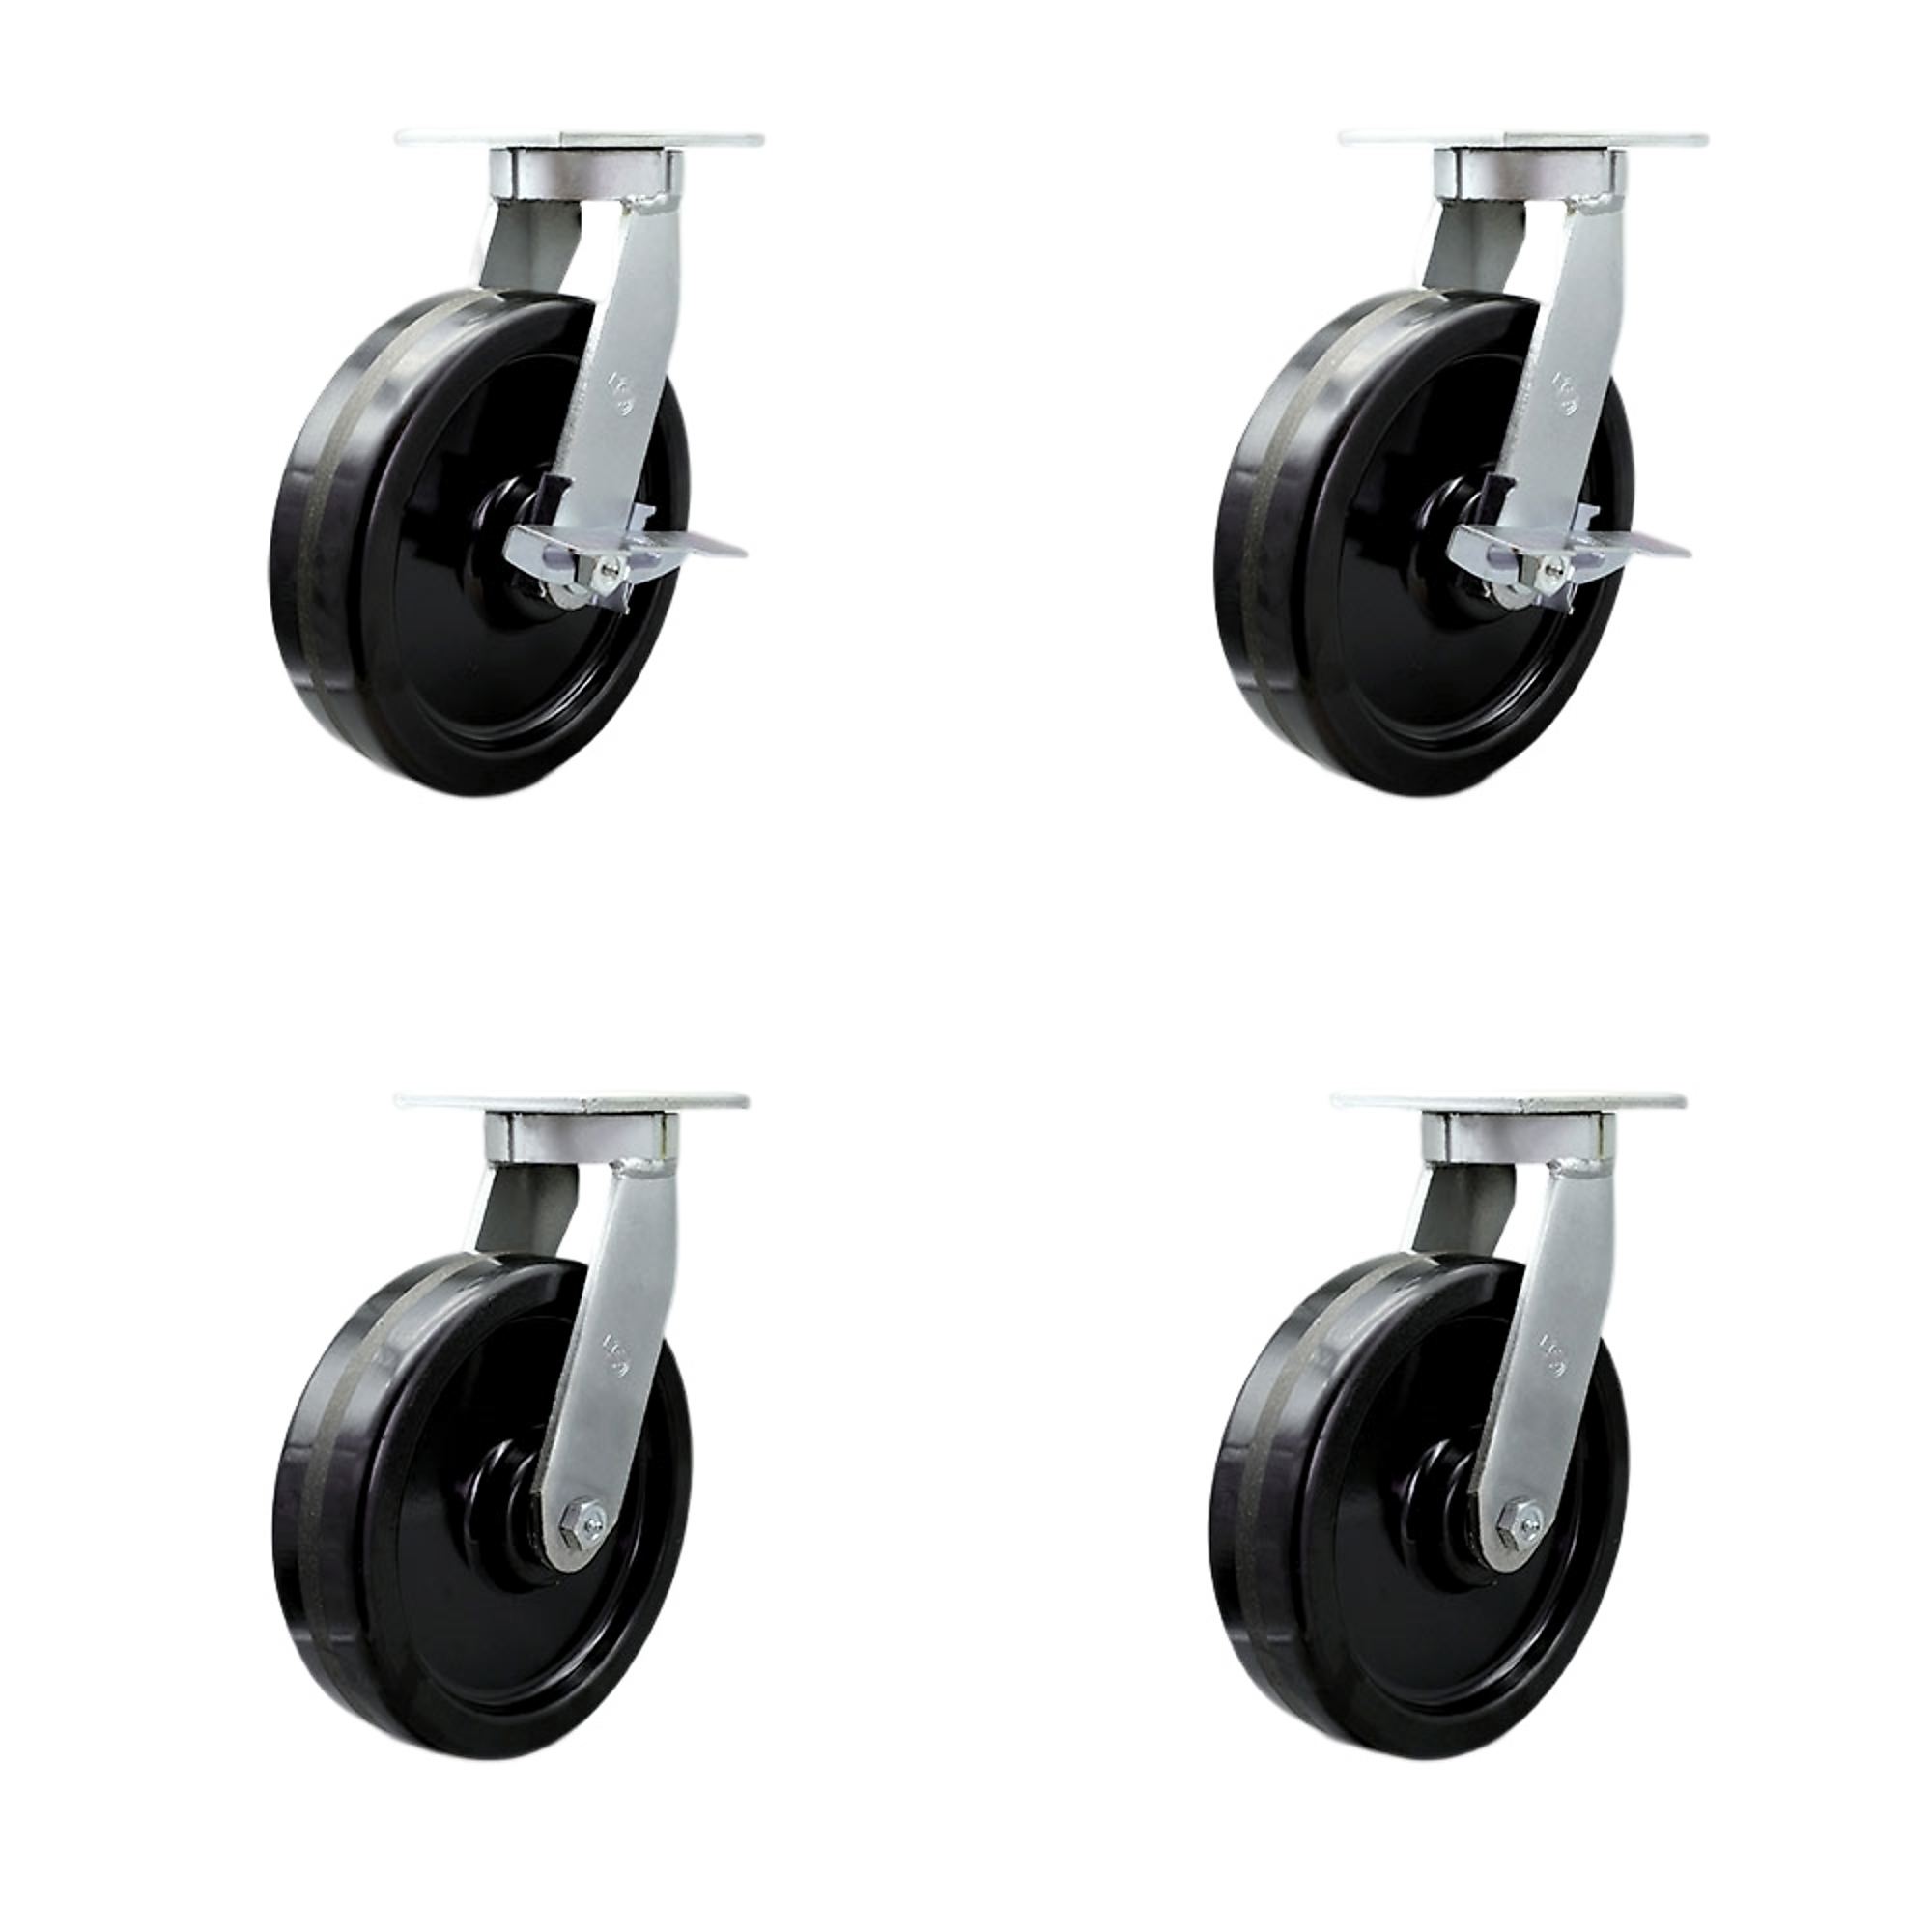 Service Caster, 10Inch x 3Inch Plate Casters, Wheel Diameter 10 in, Caster Type Swivel, Package (qty.) 4, Model SCC-KP92S1030-PHR-SLB-BSL-2-BSL-2